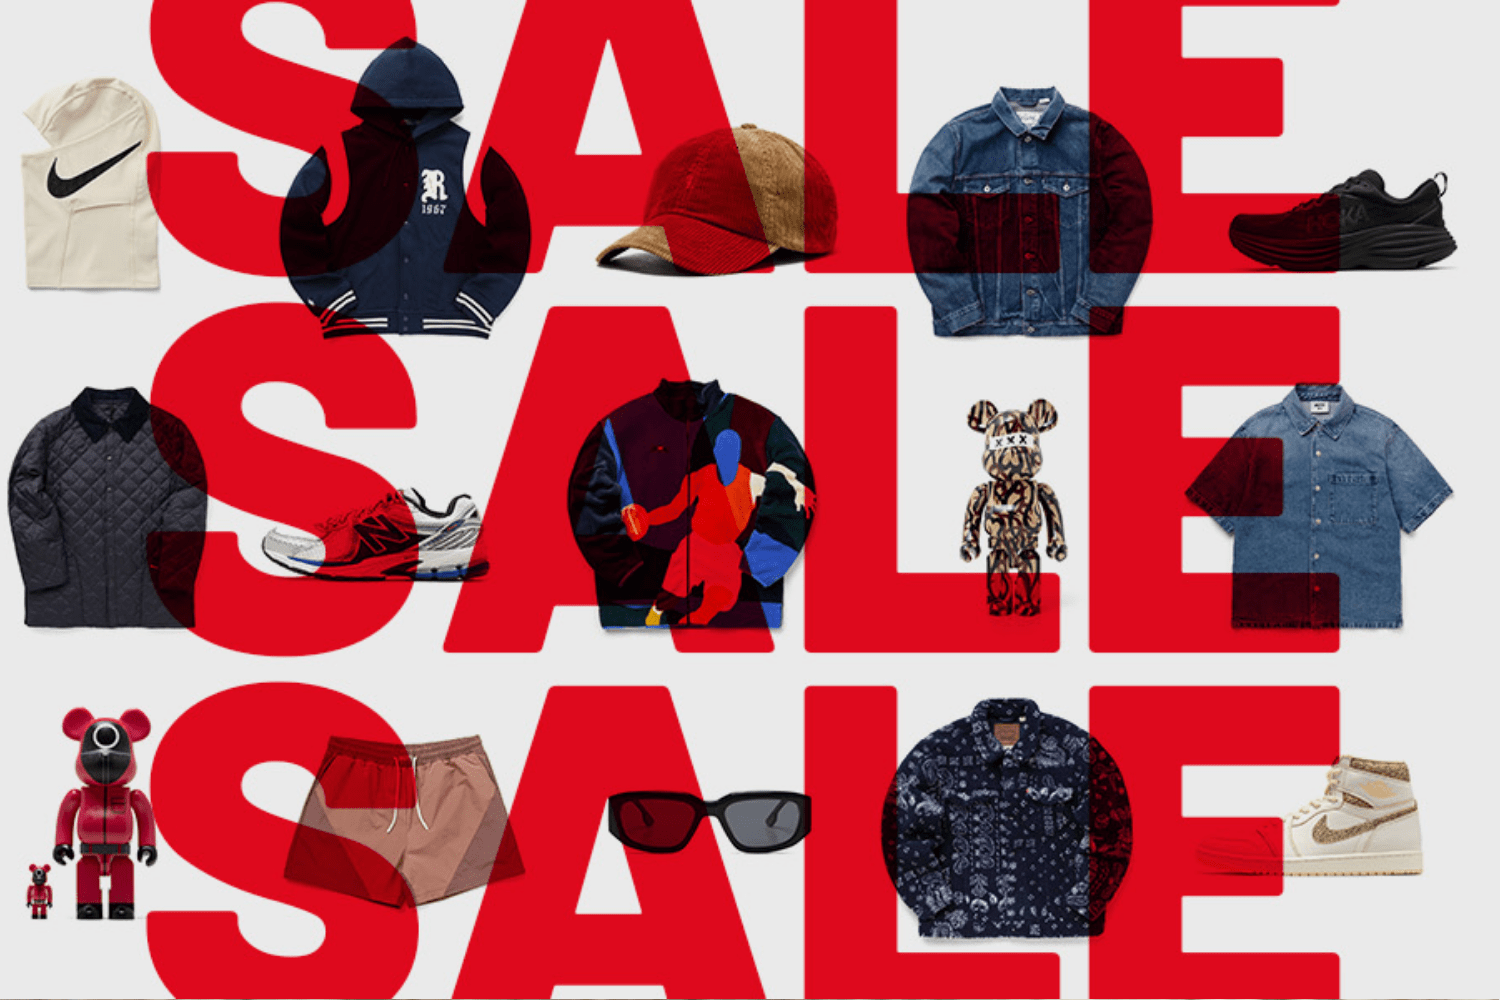 Last chance: Save 25% on almost everything at BSTN in the Back to School Sale